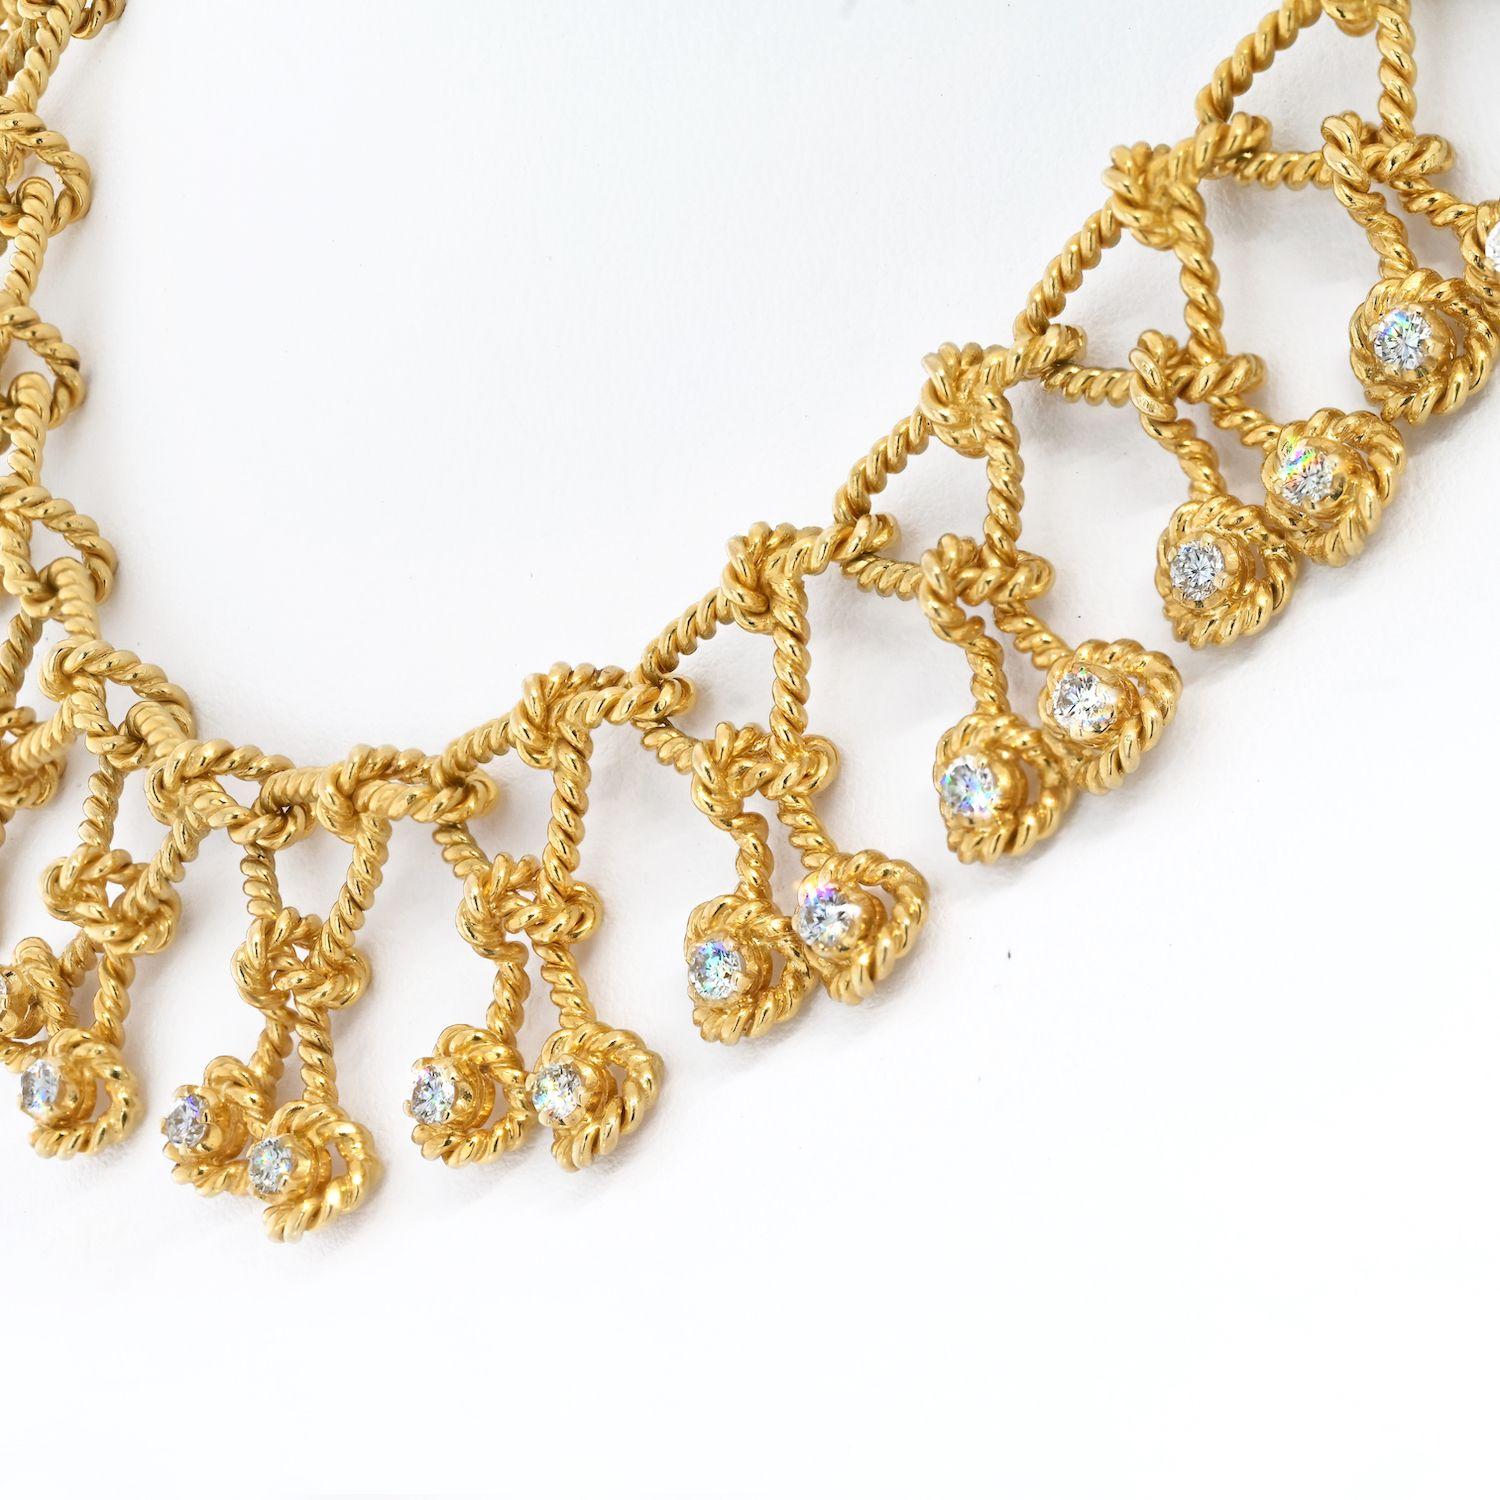 Introducing the captivating Verdura Platinum & 18K Yellow Gold Regatta Diamond Twist Rope Necklace – a true embodiment of nautical elegance that transports you to the sun-soaked shores of Sicily. This exquisite 18K gold and diamond necklace, first